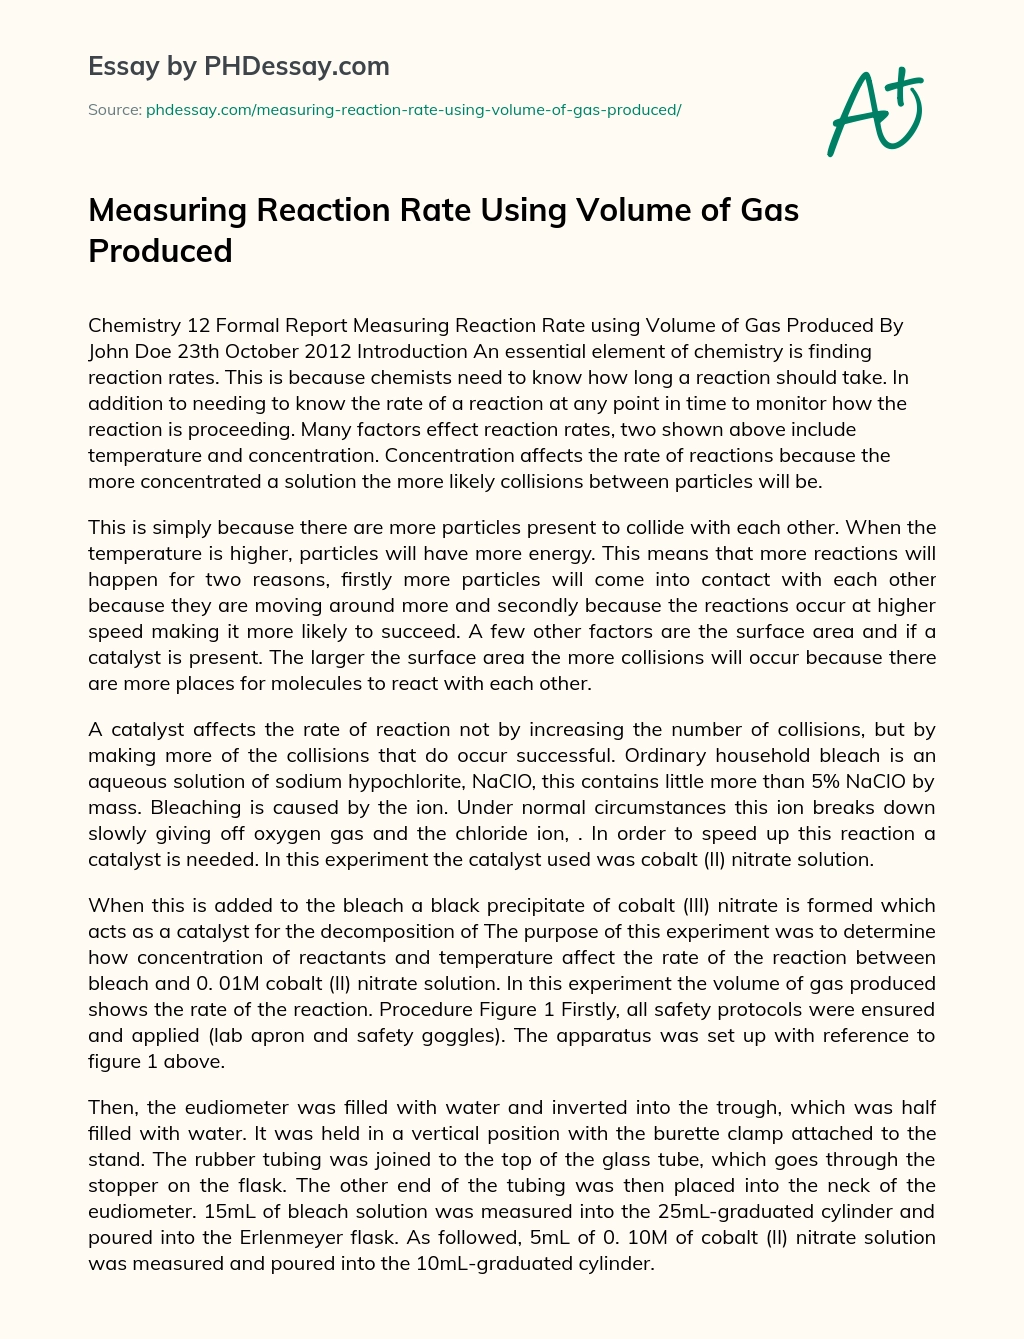 Measuring Reaction Rate Using Volume of Gas Produced essay